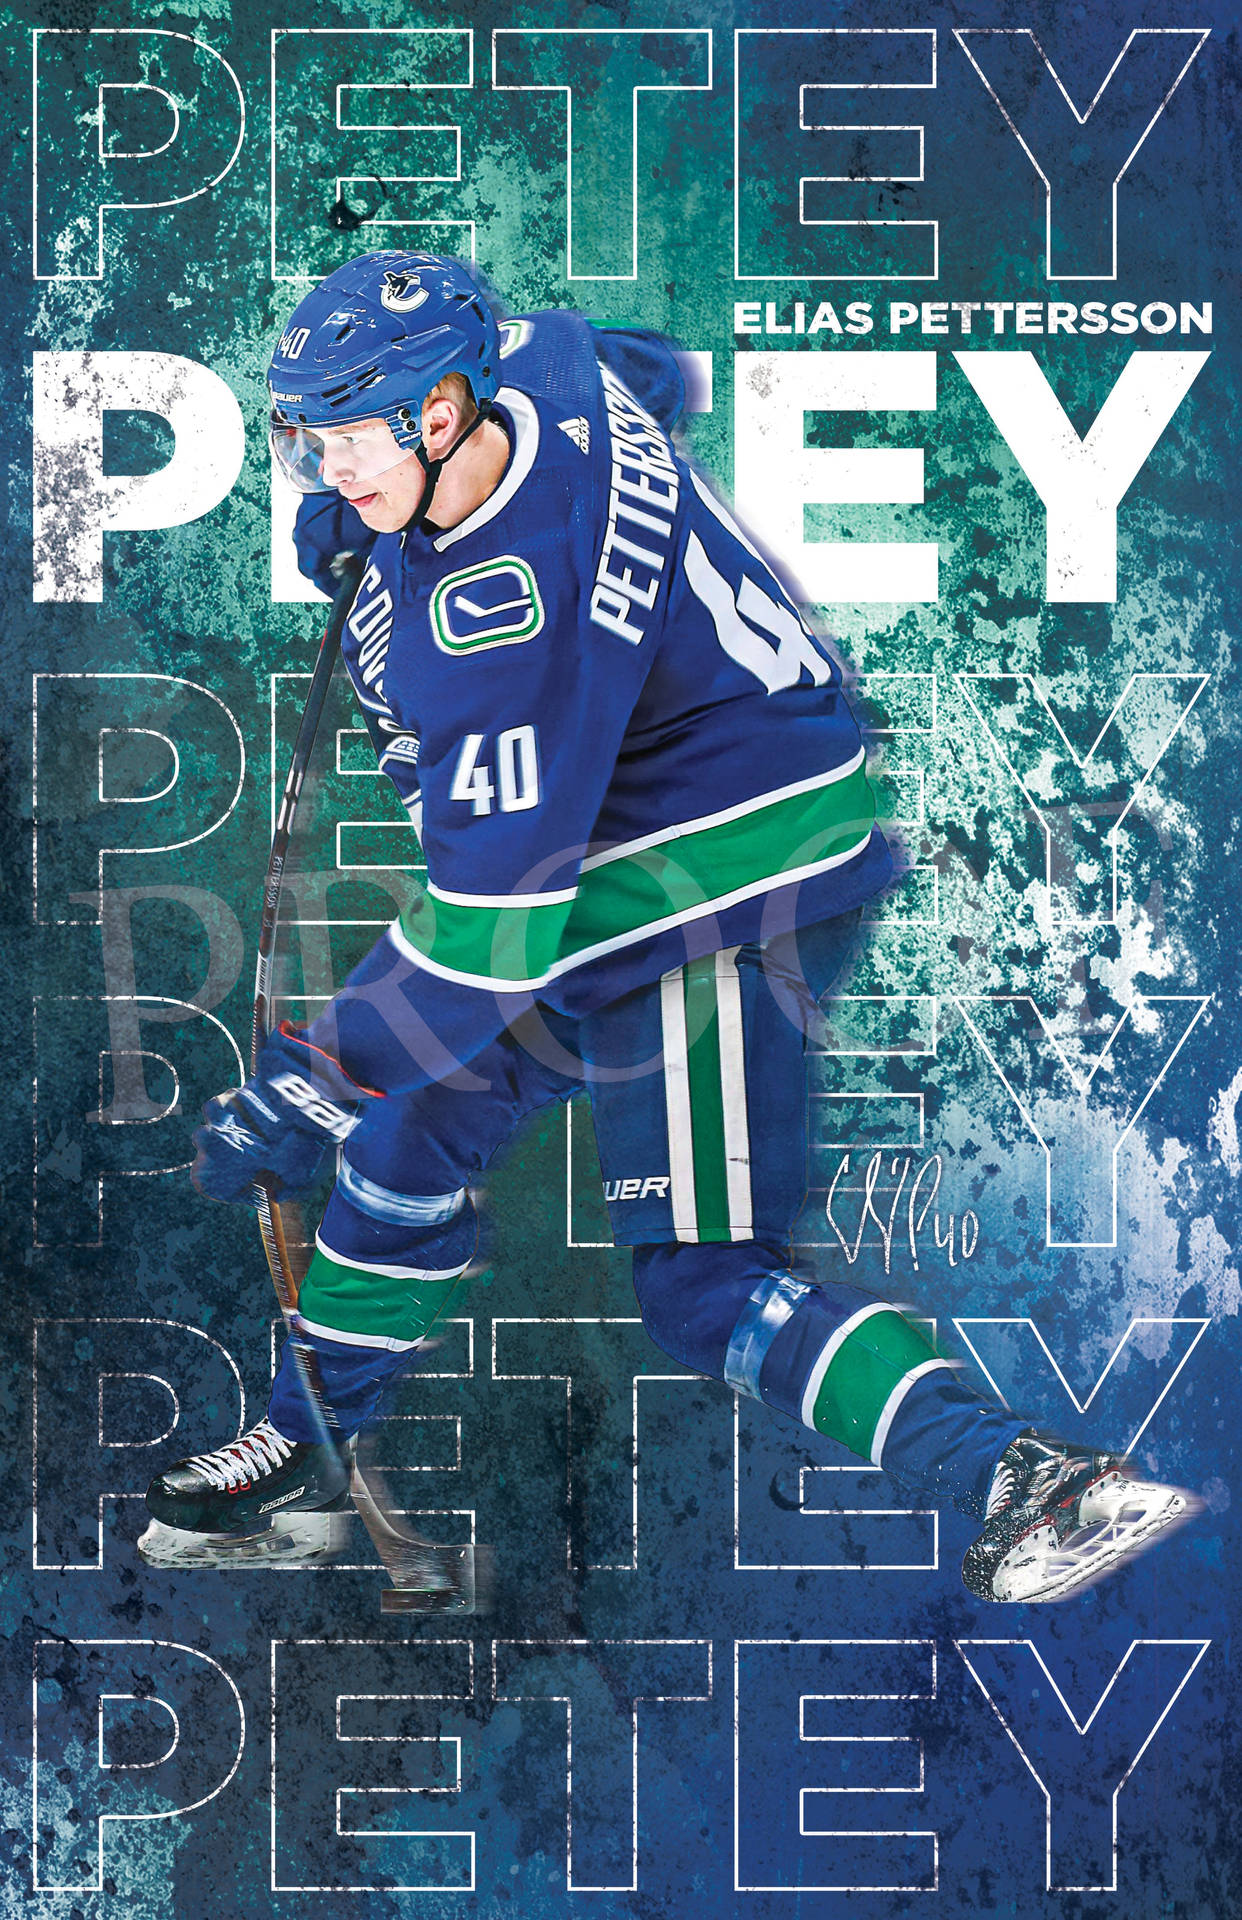 Canadian Nhl Player Elias Pettersson Digital Poster Background